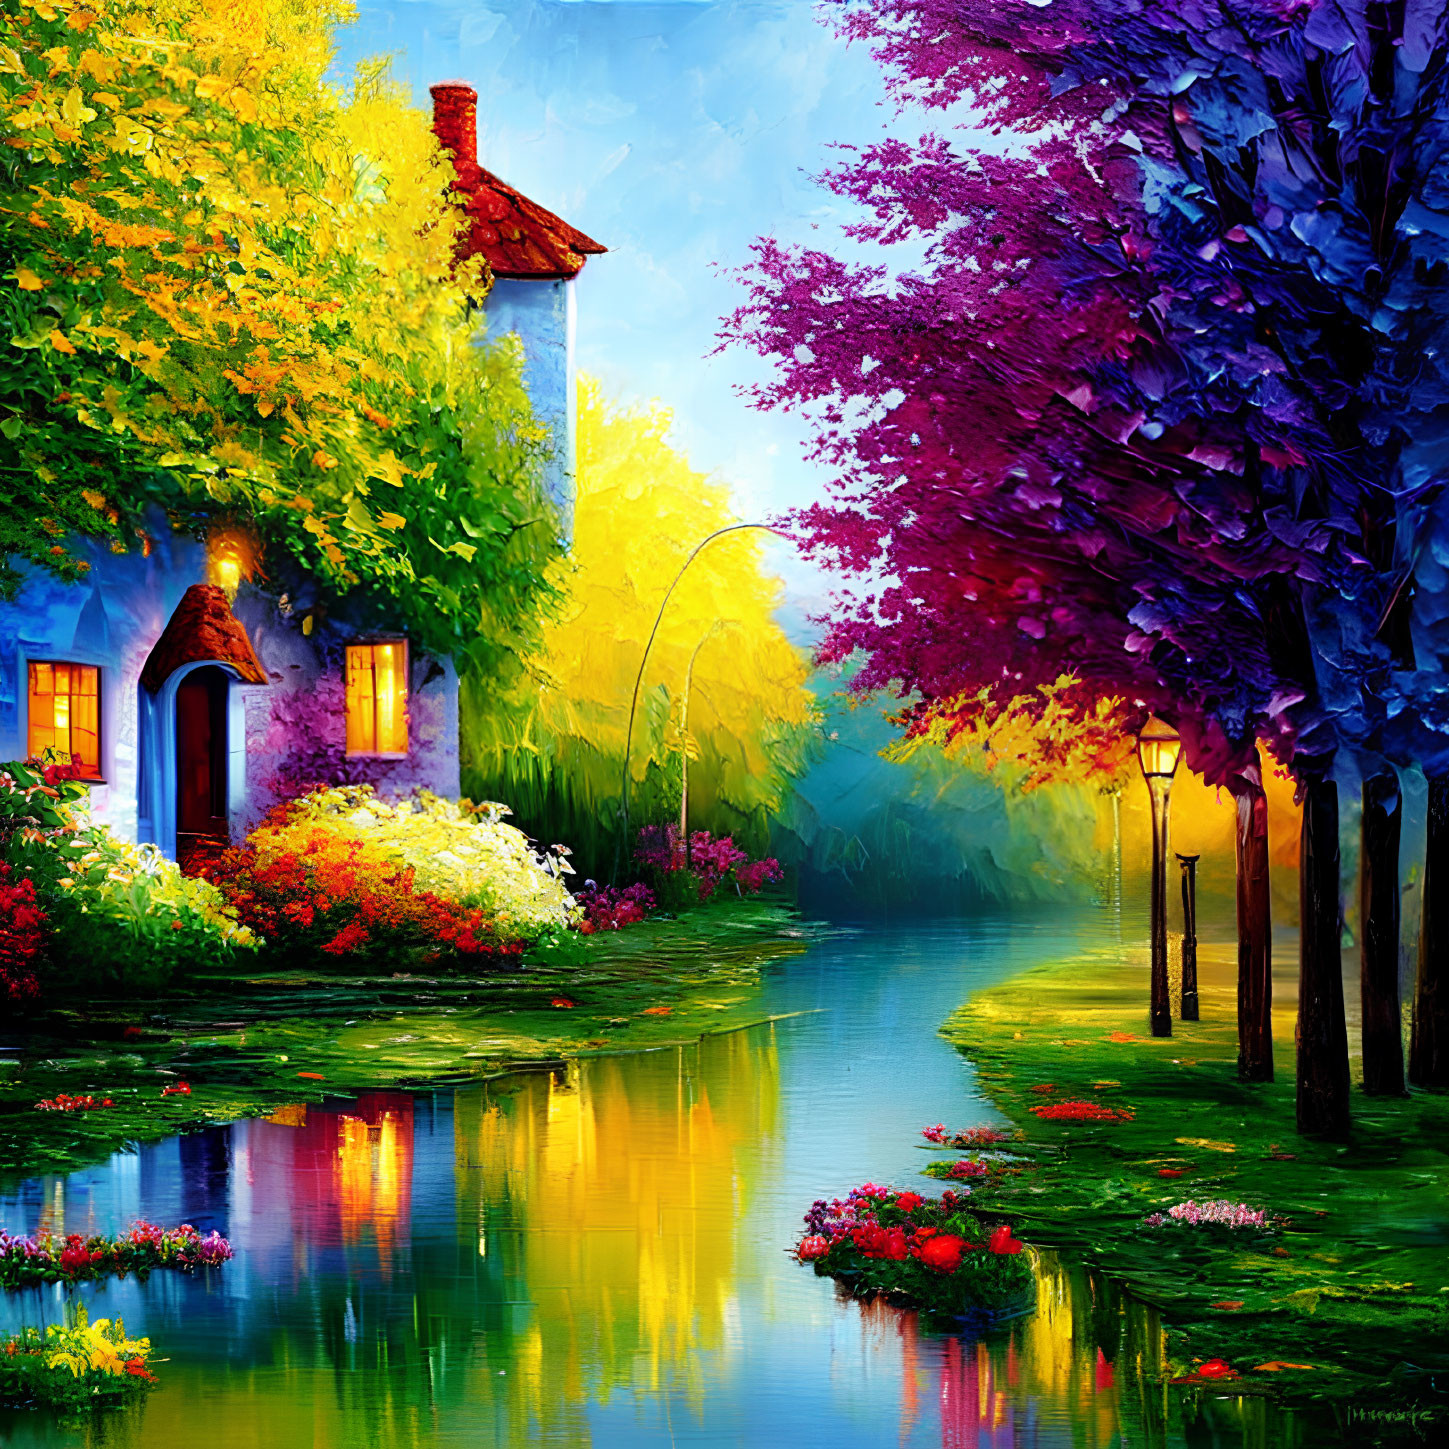 Serene river landscape with cottage, trees, and flowers